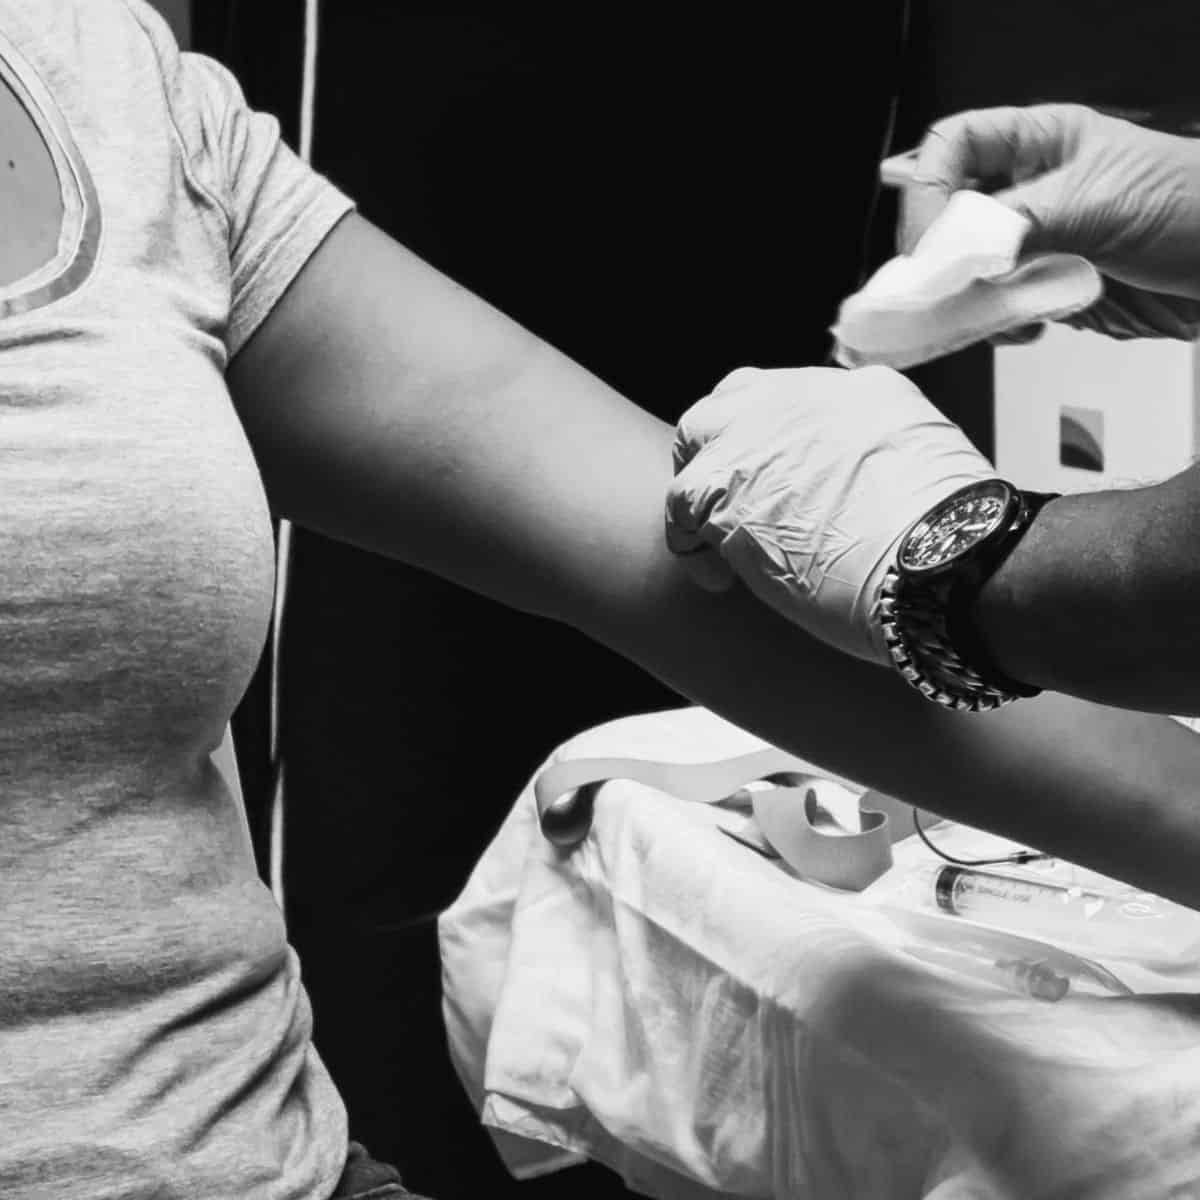 black and white photo of woman getting blood drawn from her forearm